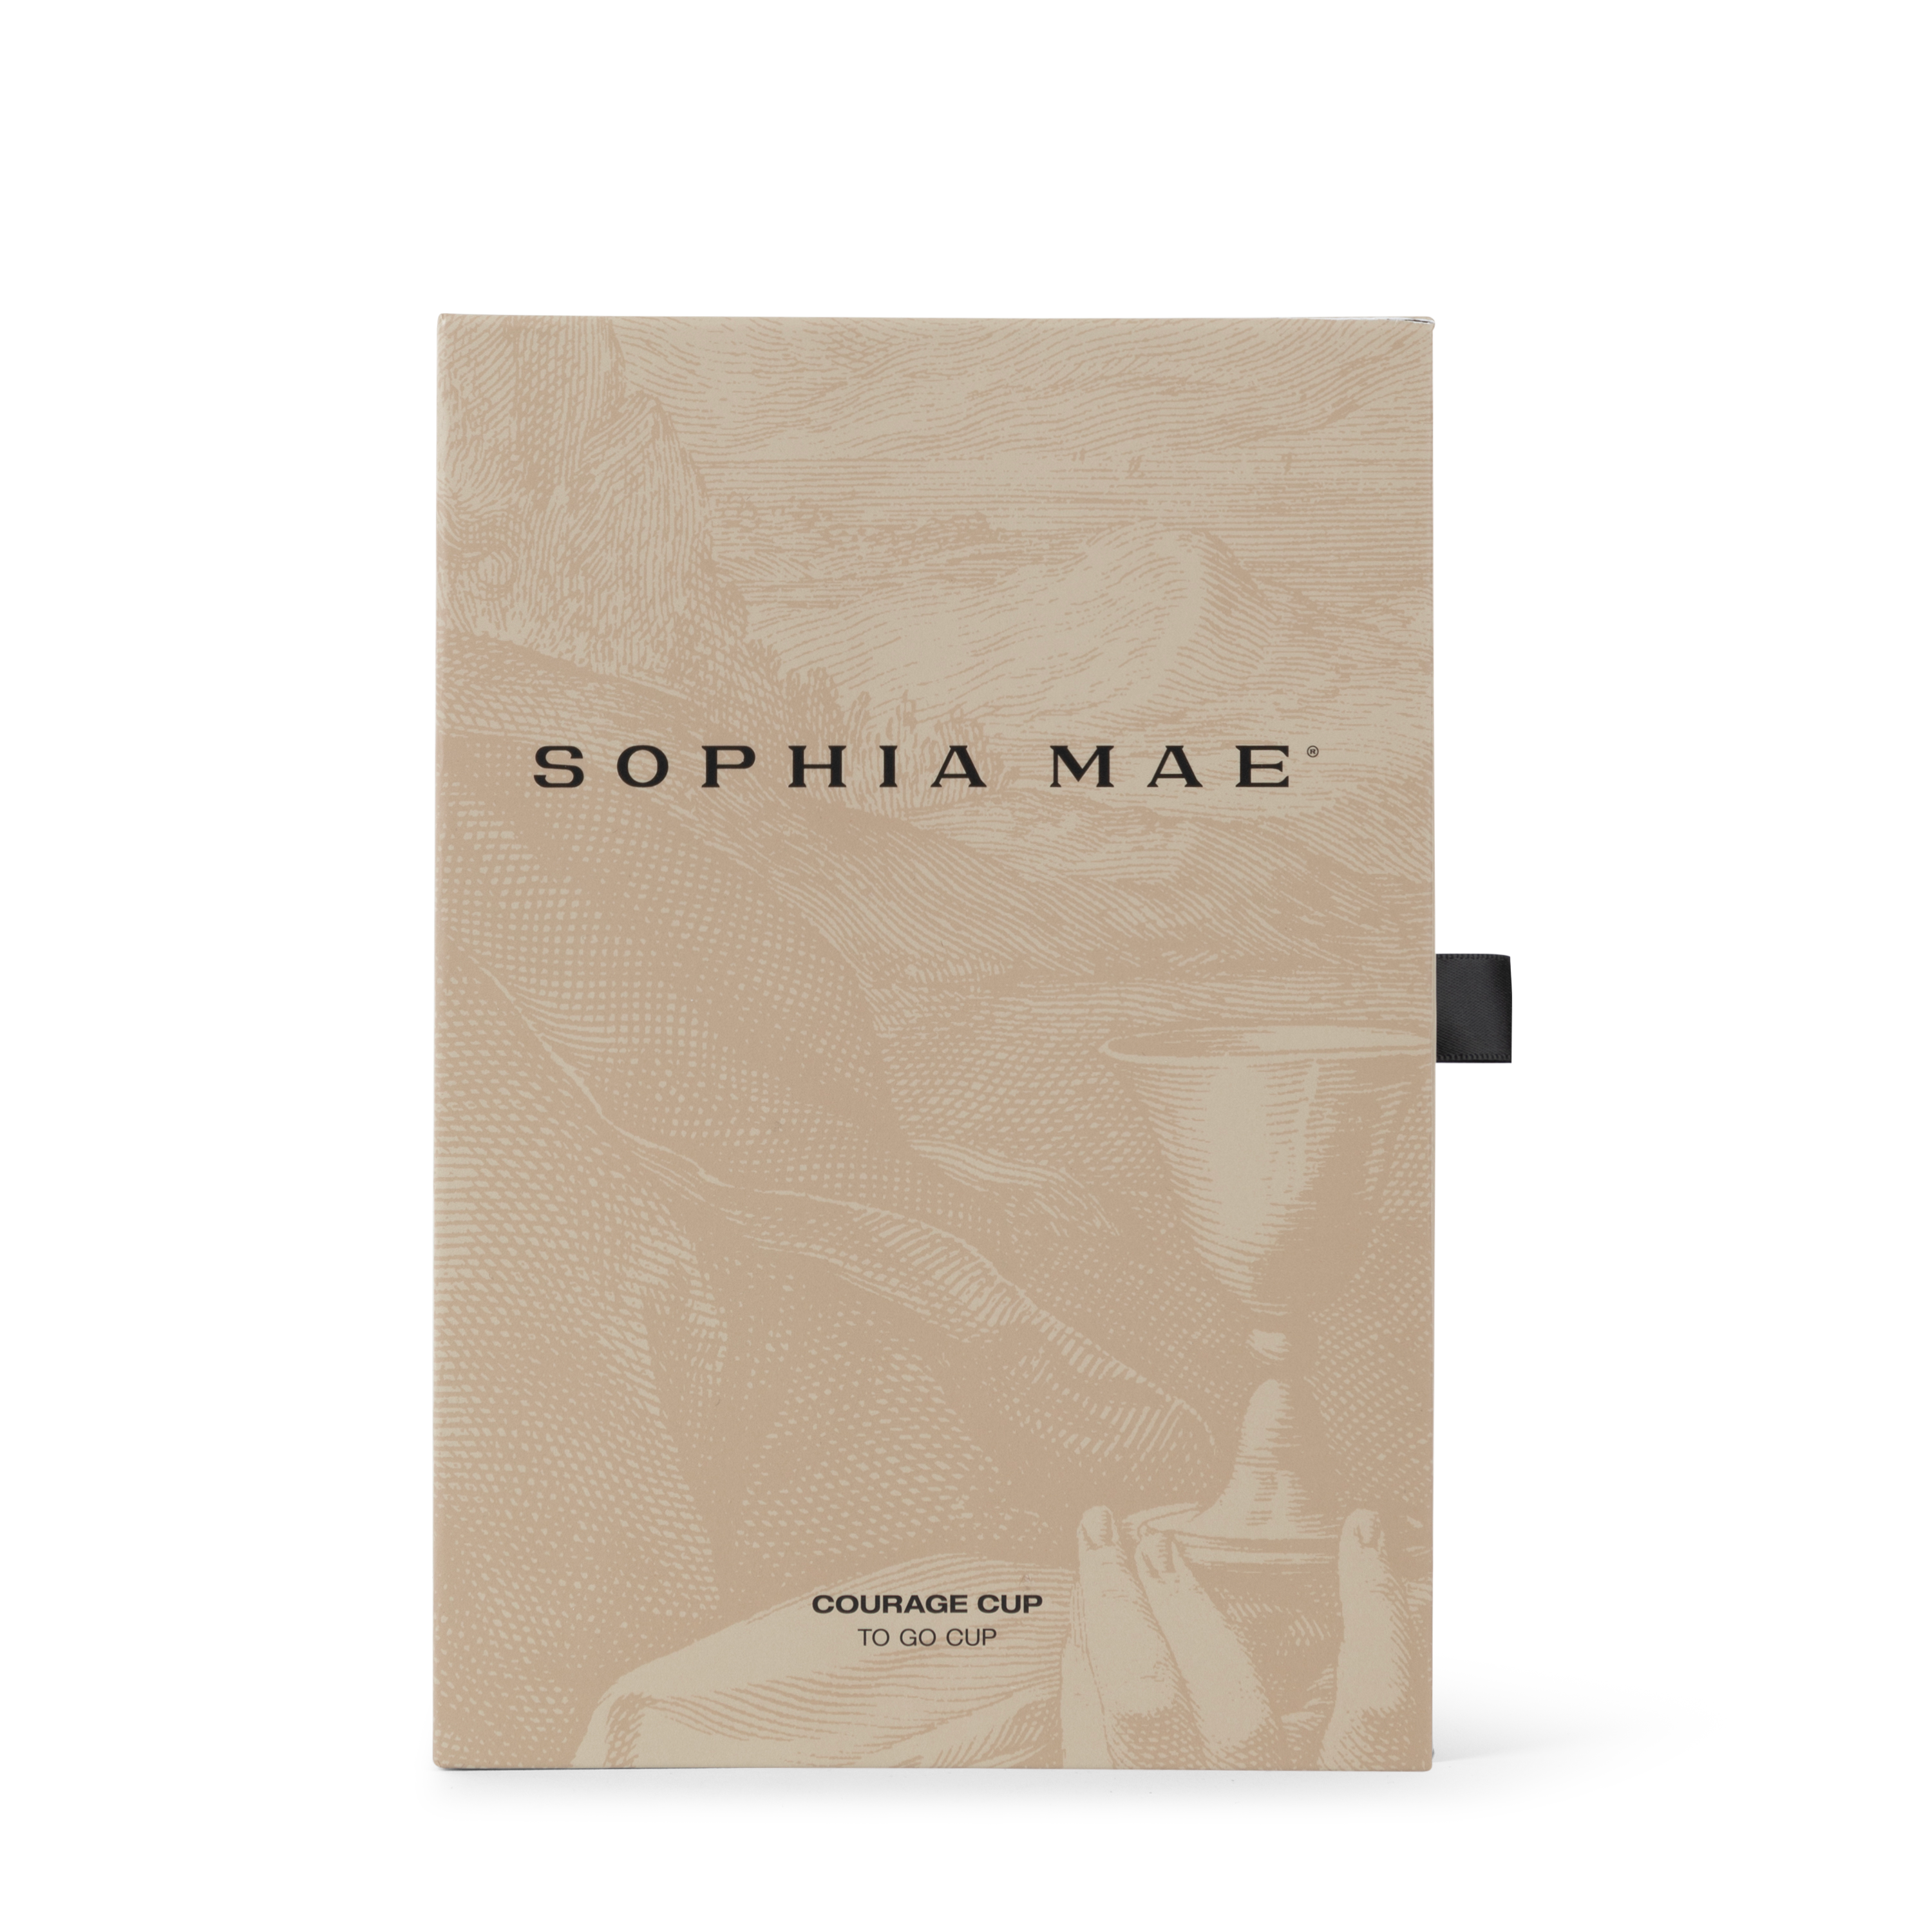 COURAGE CUP | SOPHIA MAE by Monica Geuze